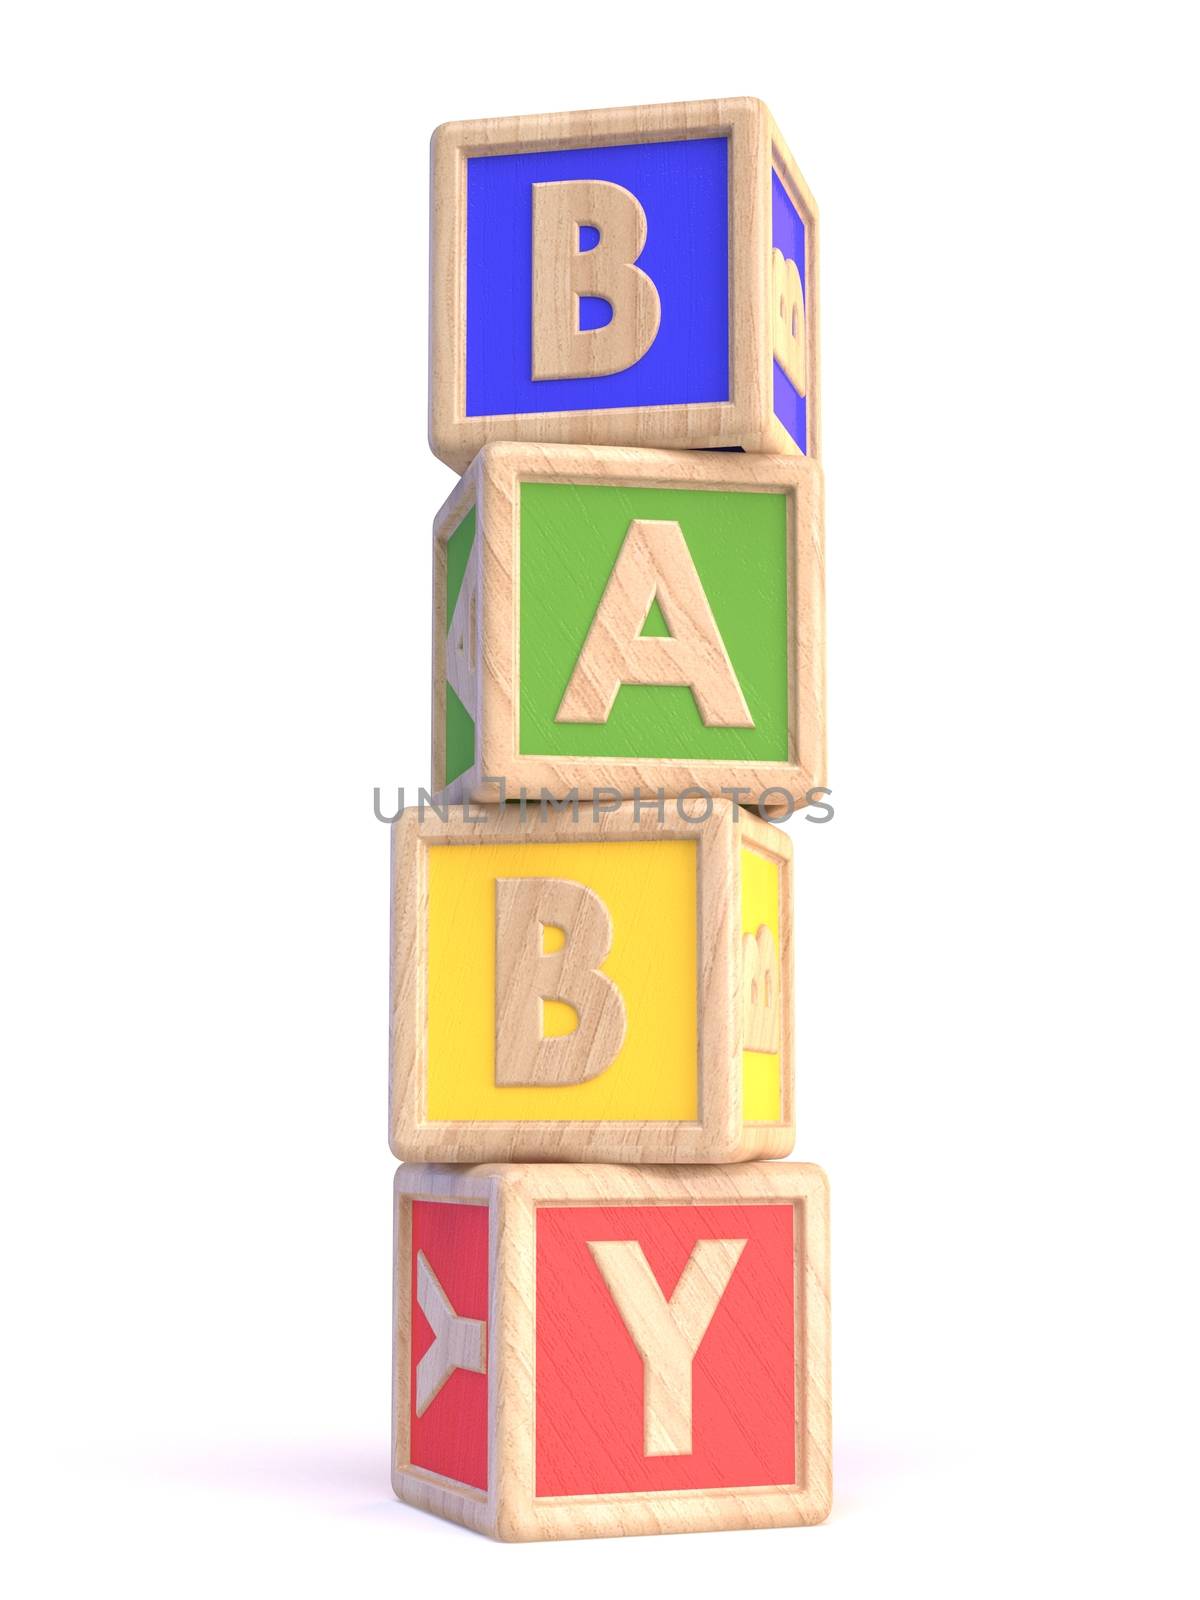 Word BABY made of wooden blocks toy vertical 3D render illustration isolated on white background